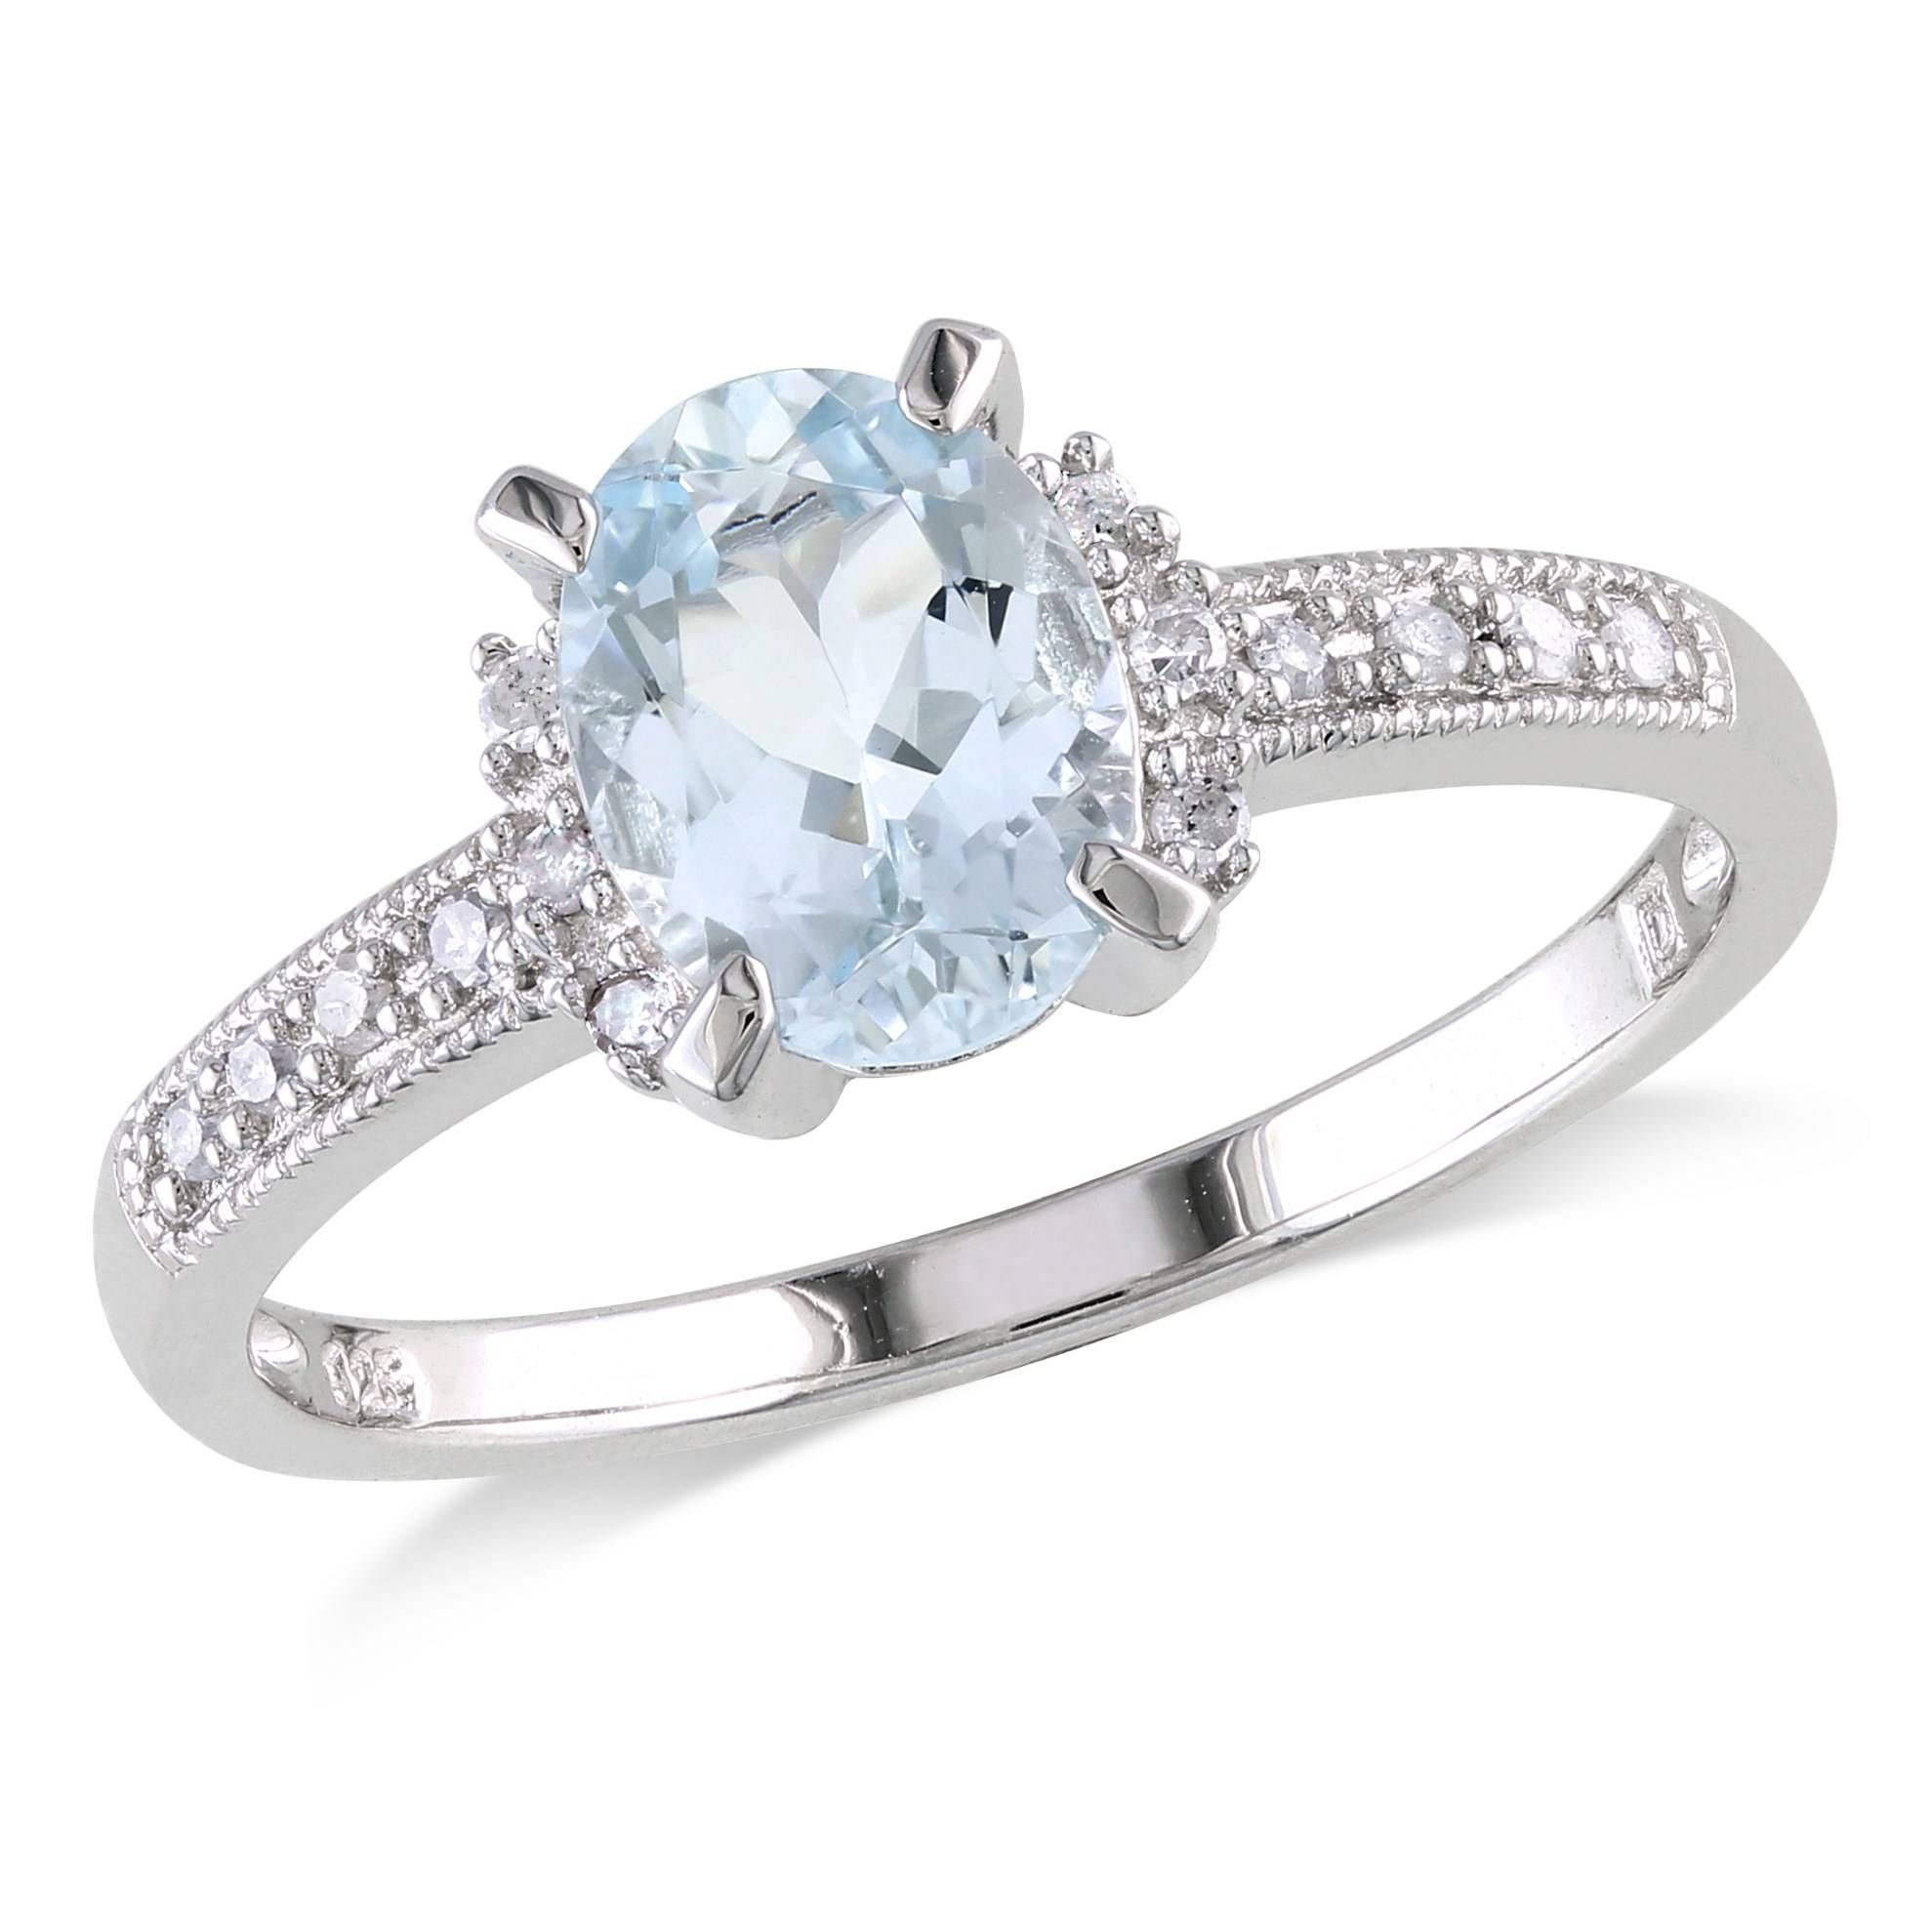 Engagement Rings : Engagement Rings And Wedding Band Sets Stunning Regarding Engagement Ring Sets Under  (View 11 of 15)